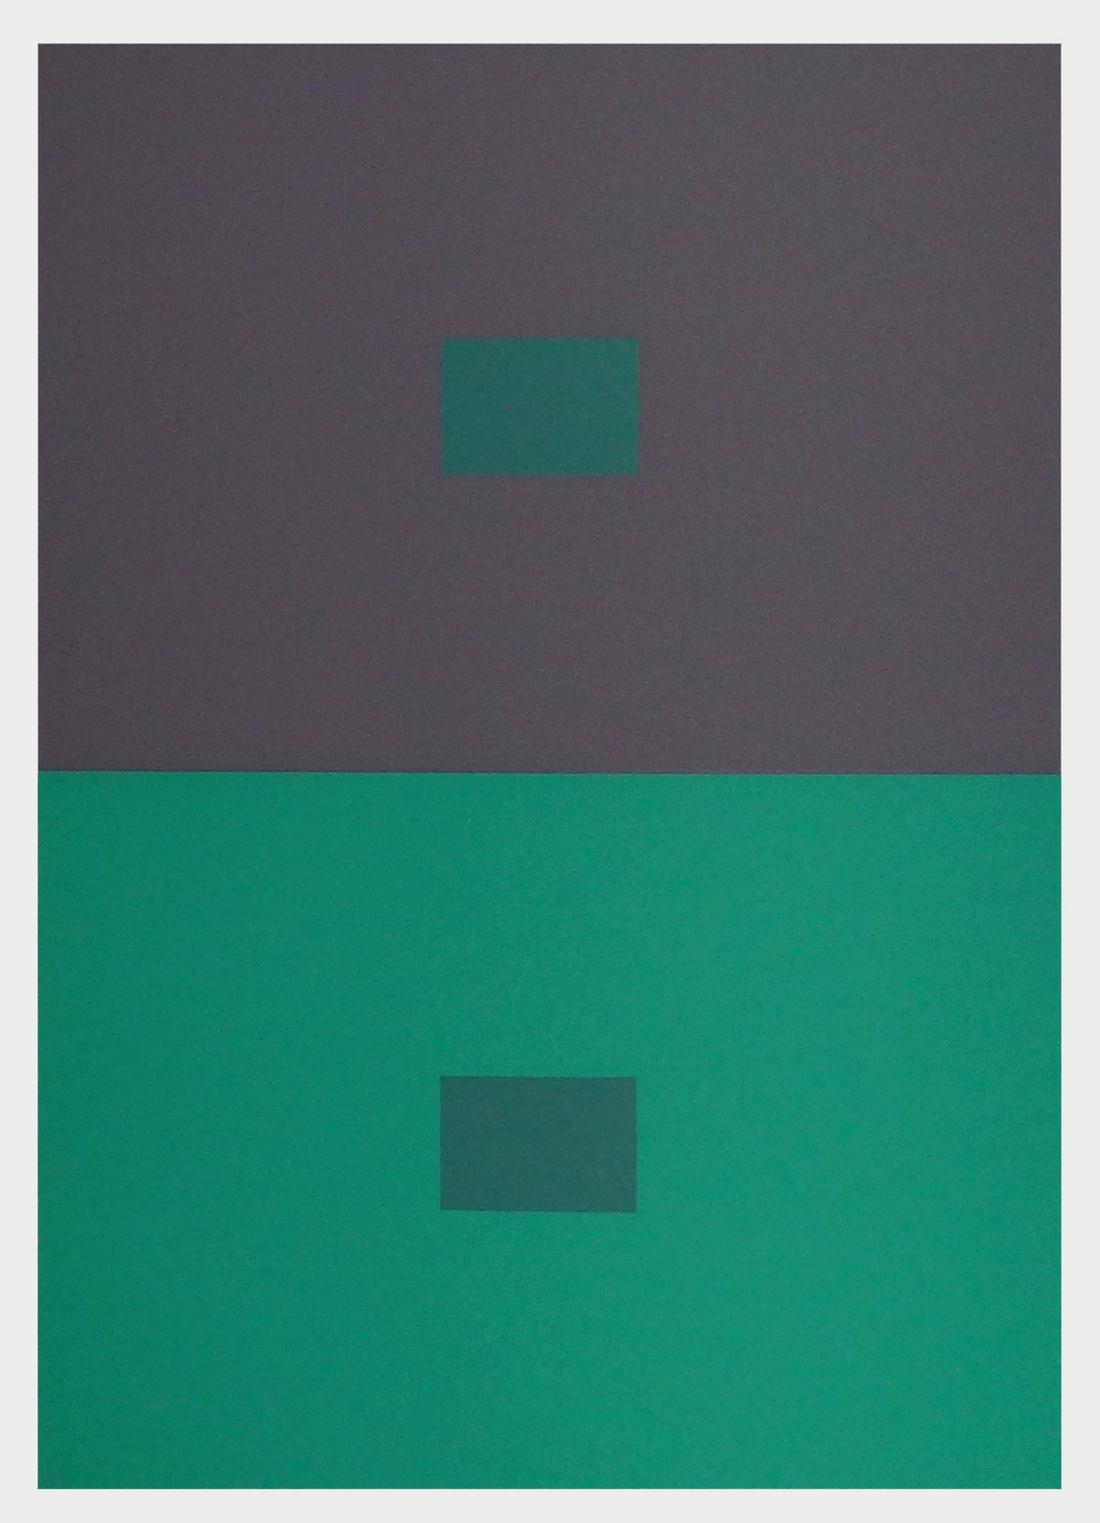 Josef Albers, Interaction of Color, 1963. Francis Frost.